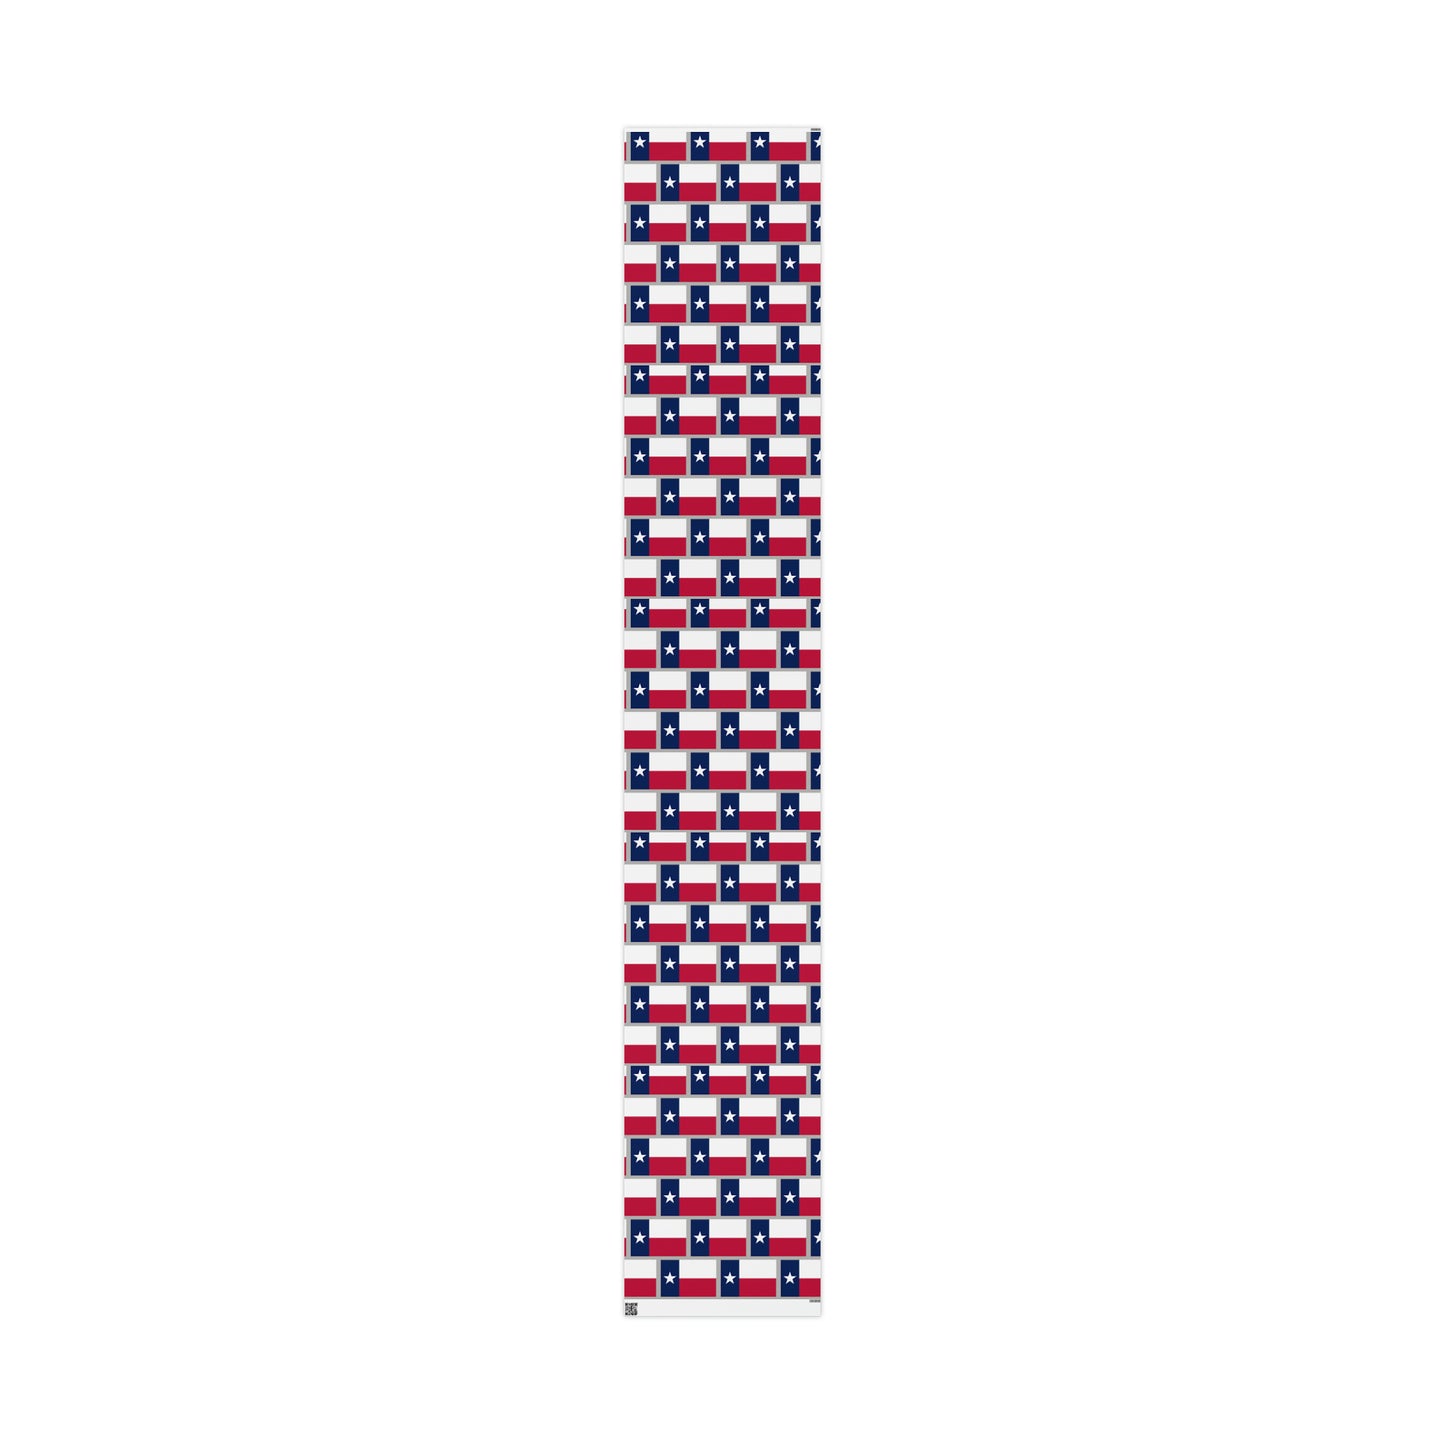 Texas State Flag Birthday Gift Wrapping Paper Holiday Lone Star